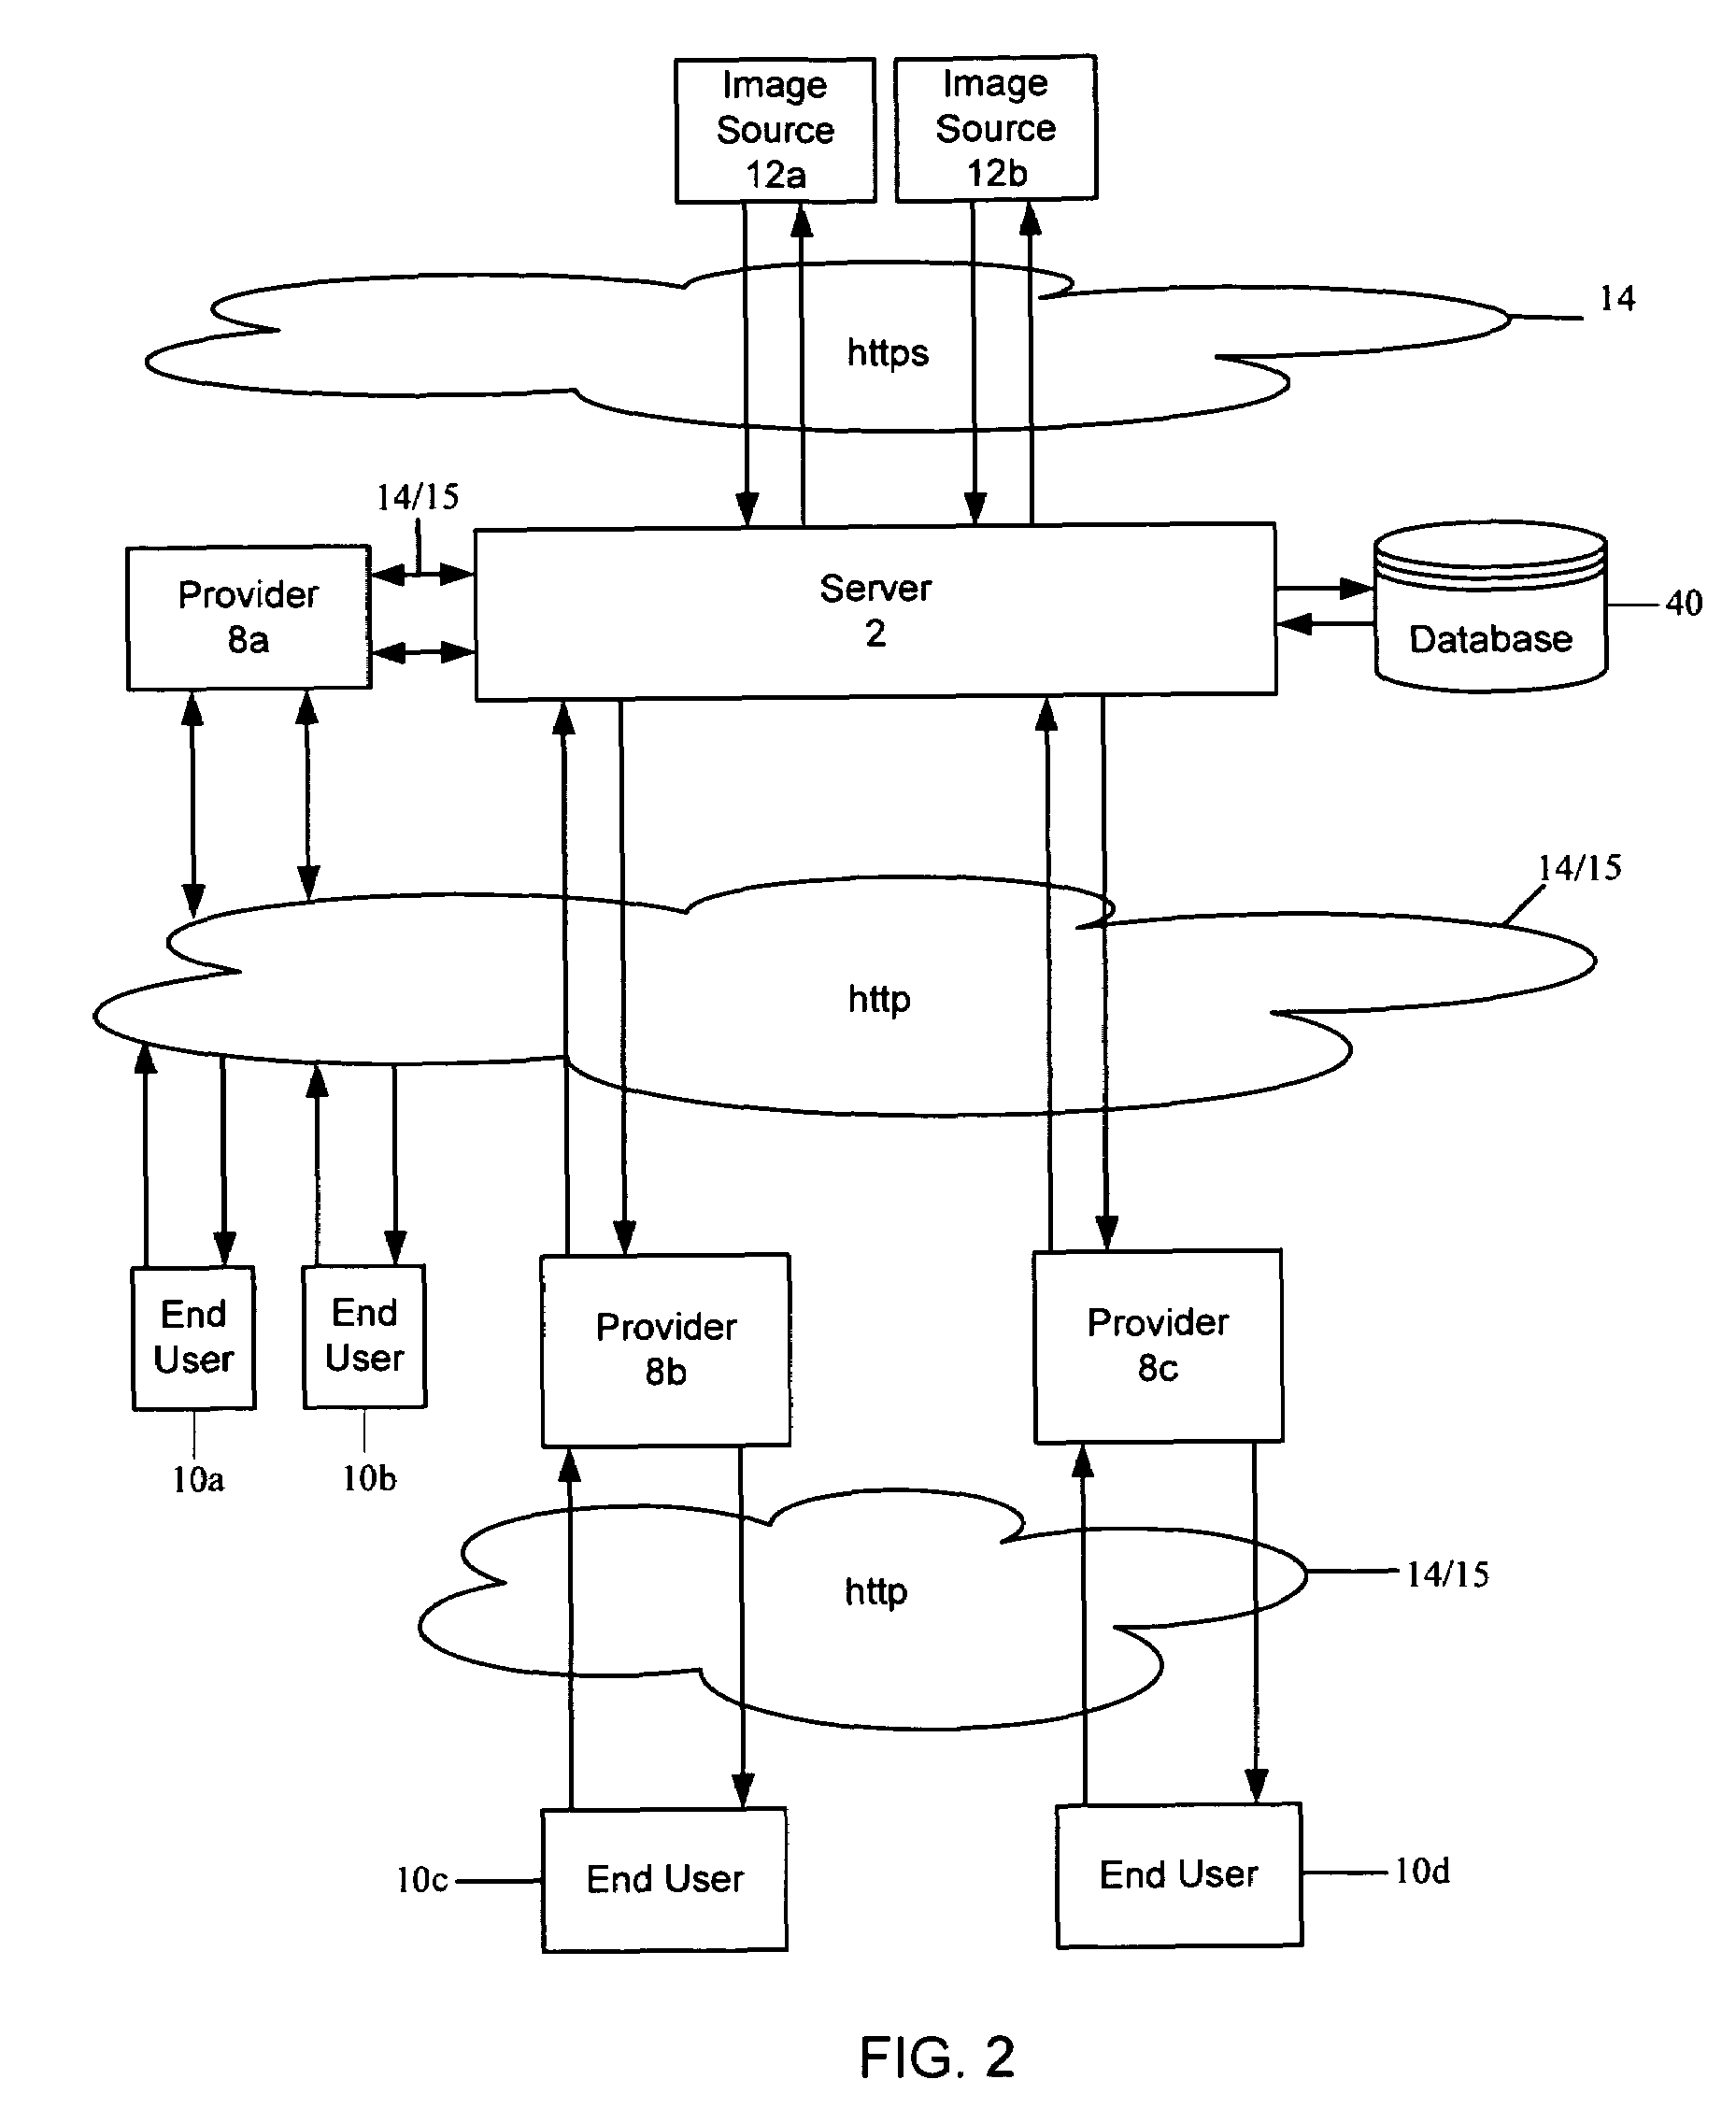 Method and system for approving documents based on image similarity